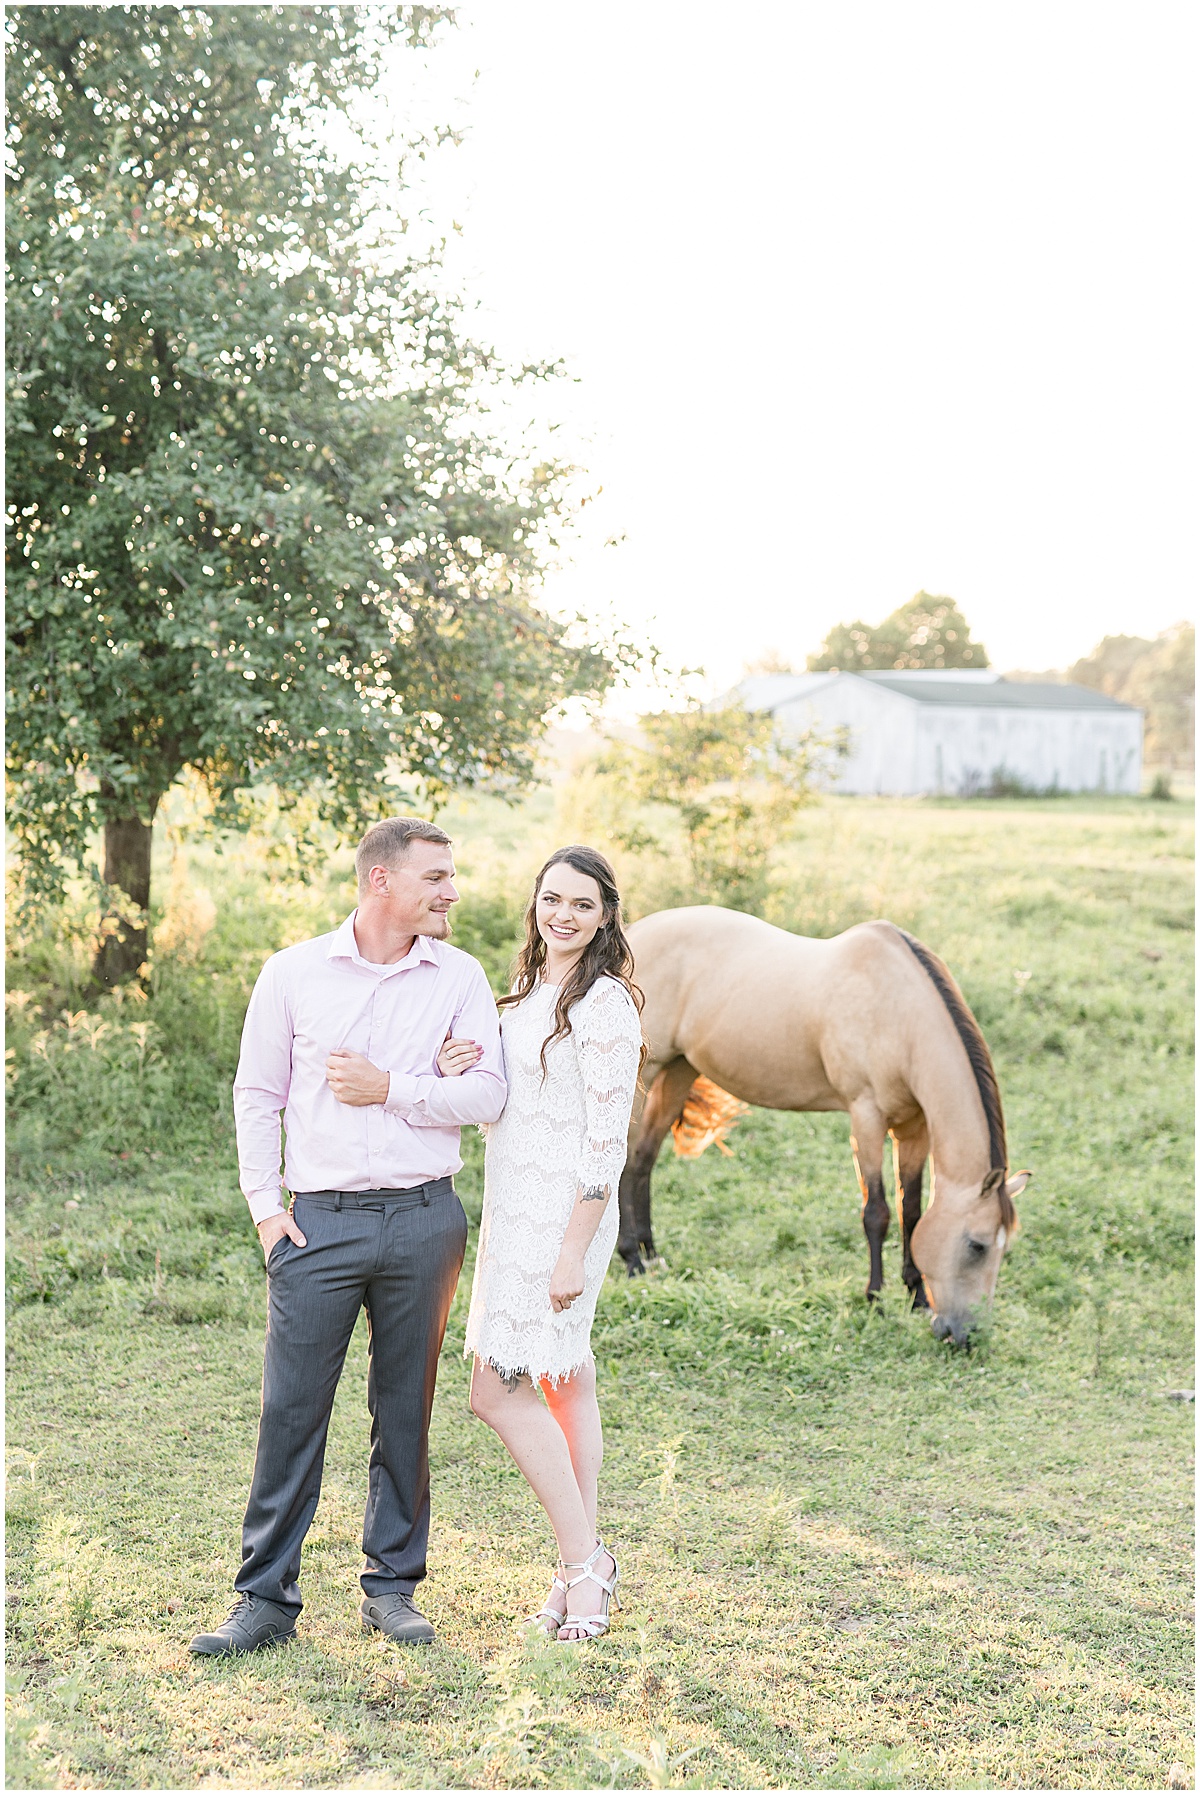 Couple in front of horse during engagement photos by Indianapolis wedding photographer Victoria Rayburn Photography